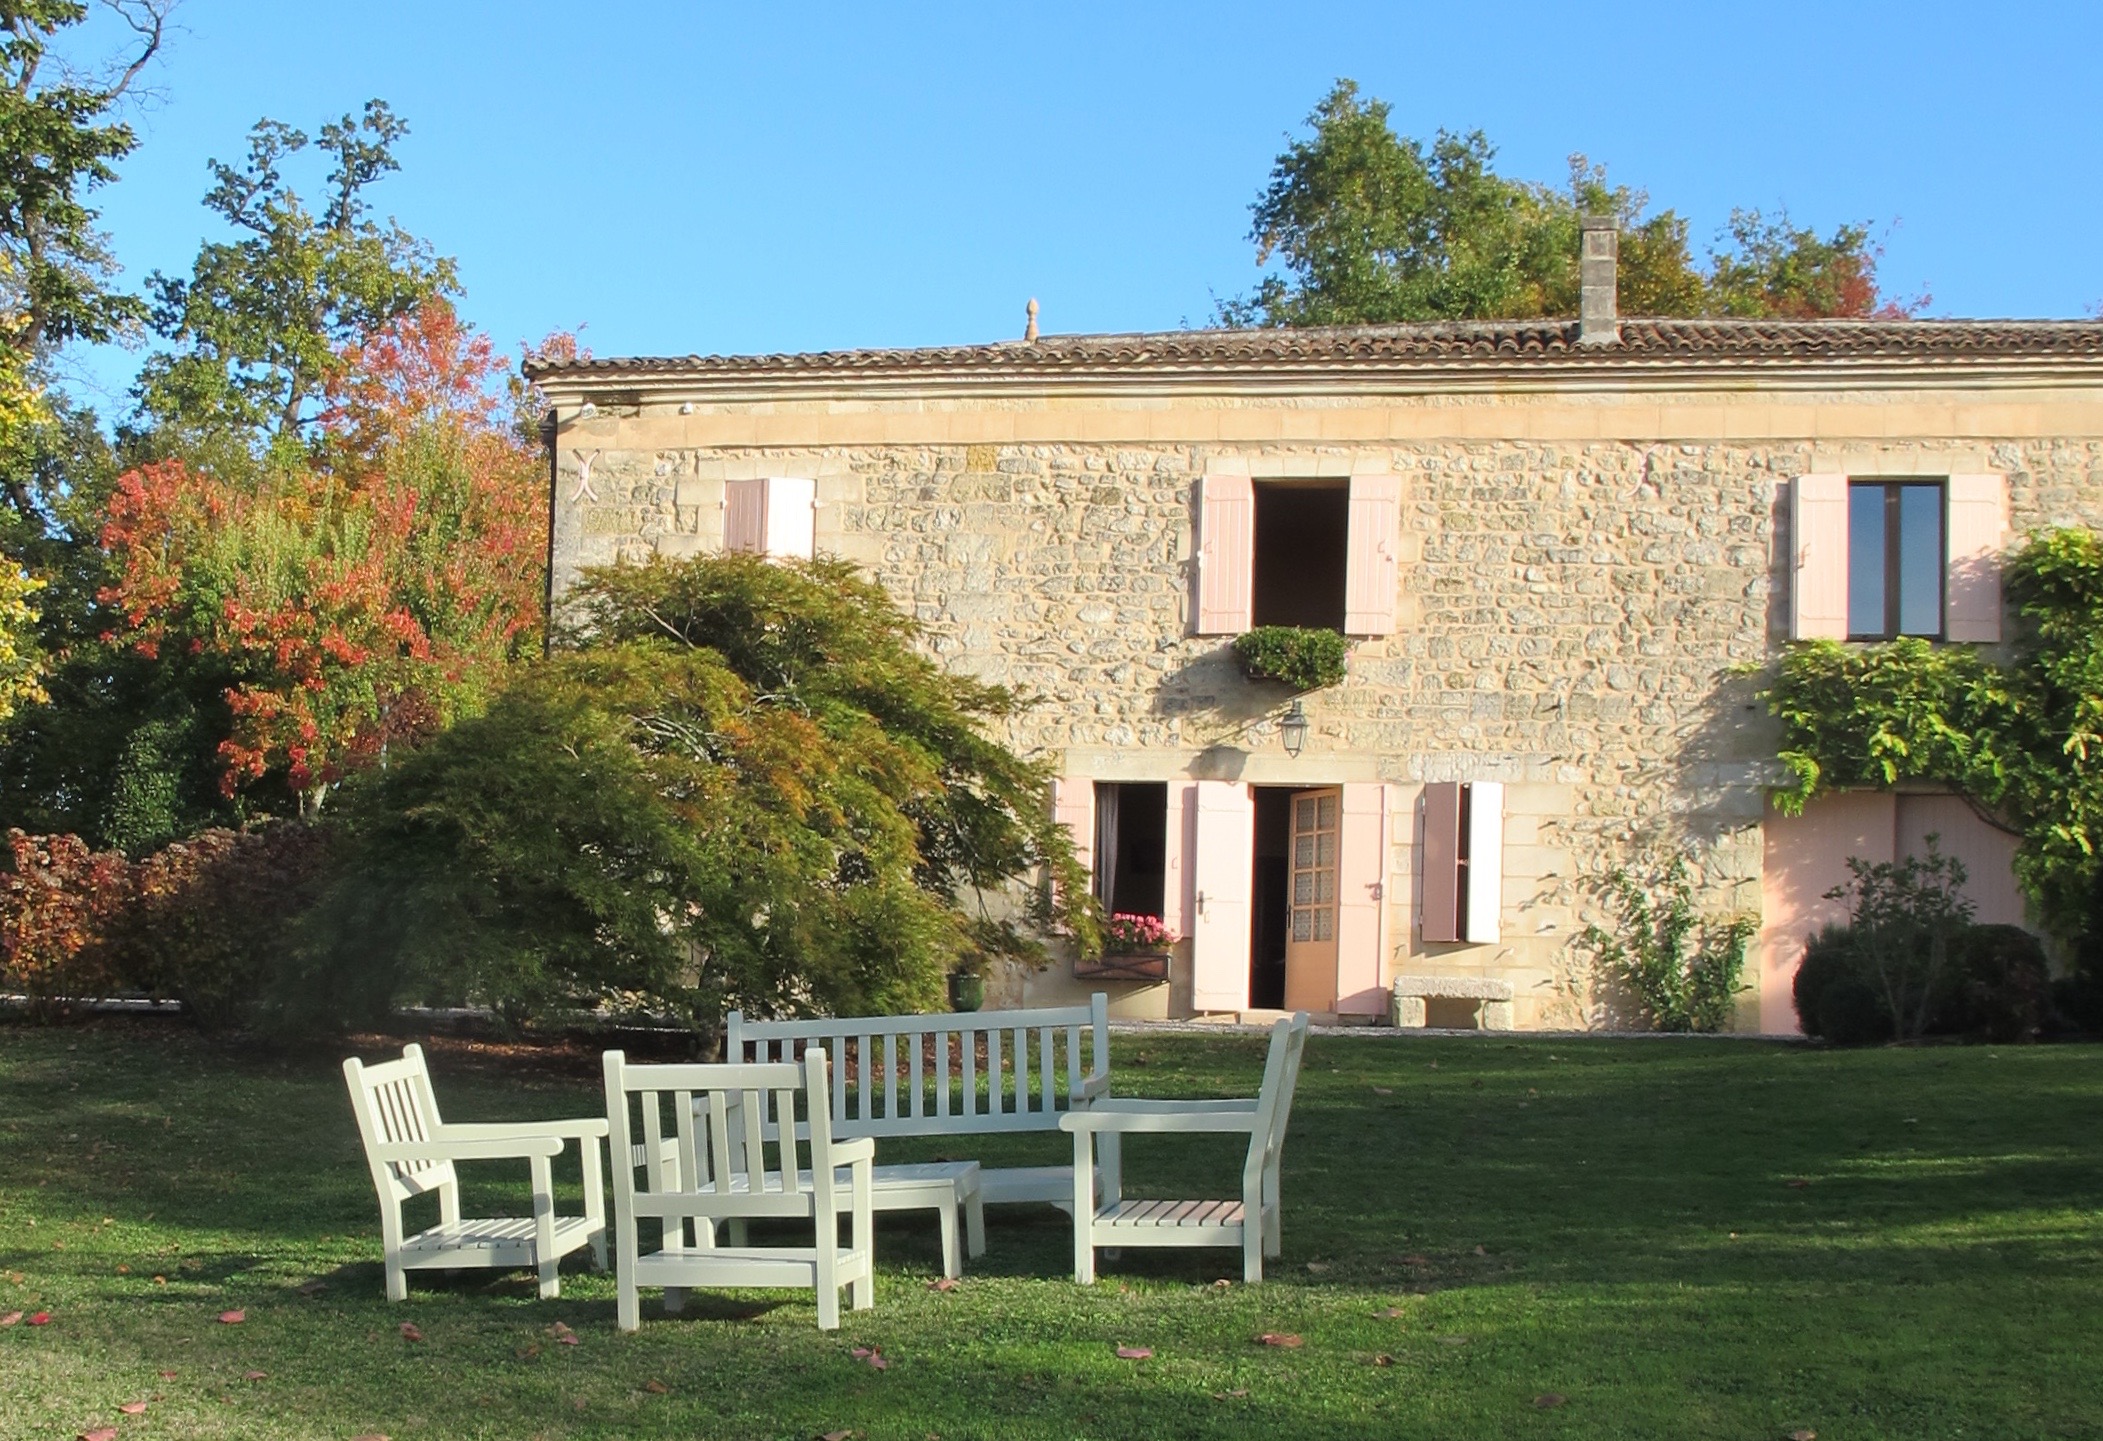 Château Troplong Mondot offers a cottage house and three apartments on the estate. Photo by Marla Norman